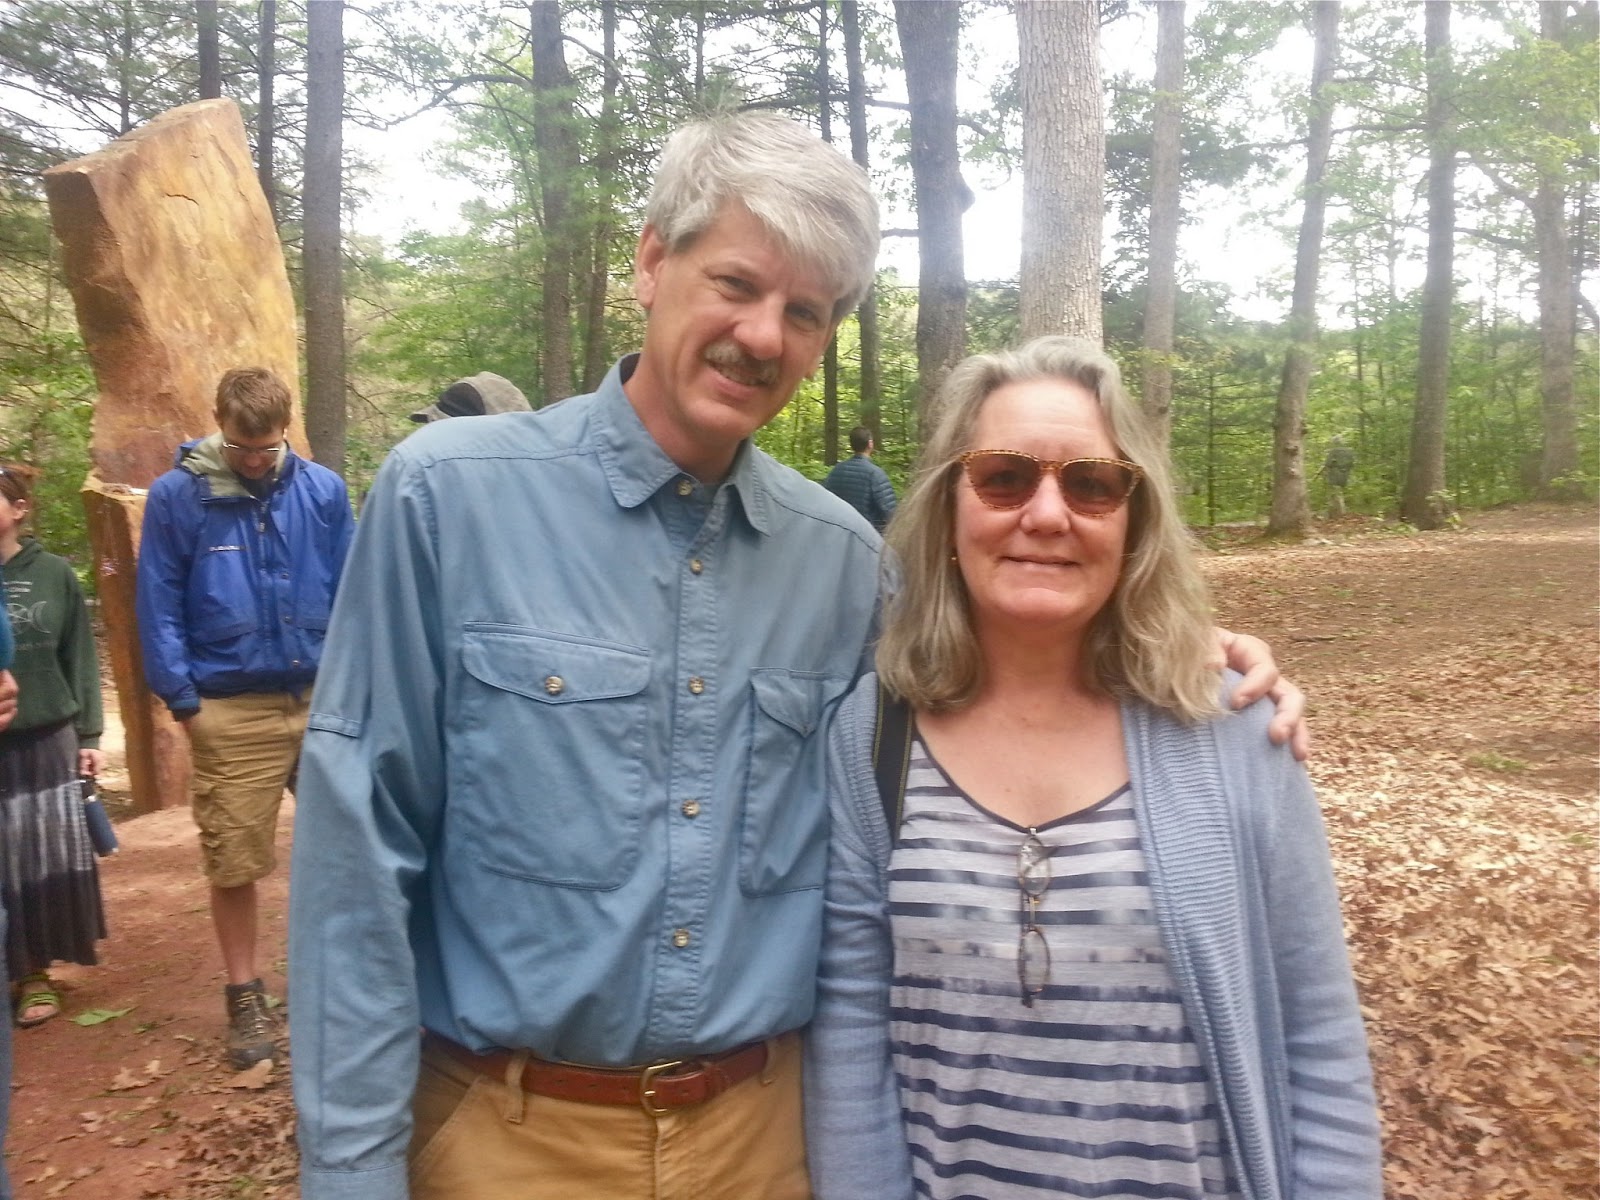 Gail Zawacki with Guy McPherson at the Age of Limits conference in May 2013, held at the Four Quarters Interfaith Sanctuary in rural Pennsylvania. Photo: Gail Zawacki